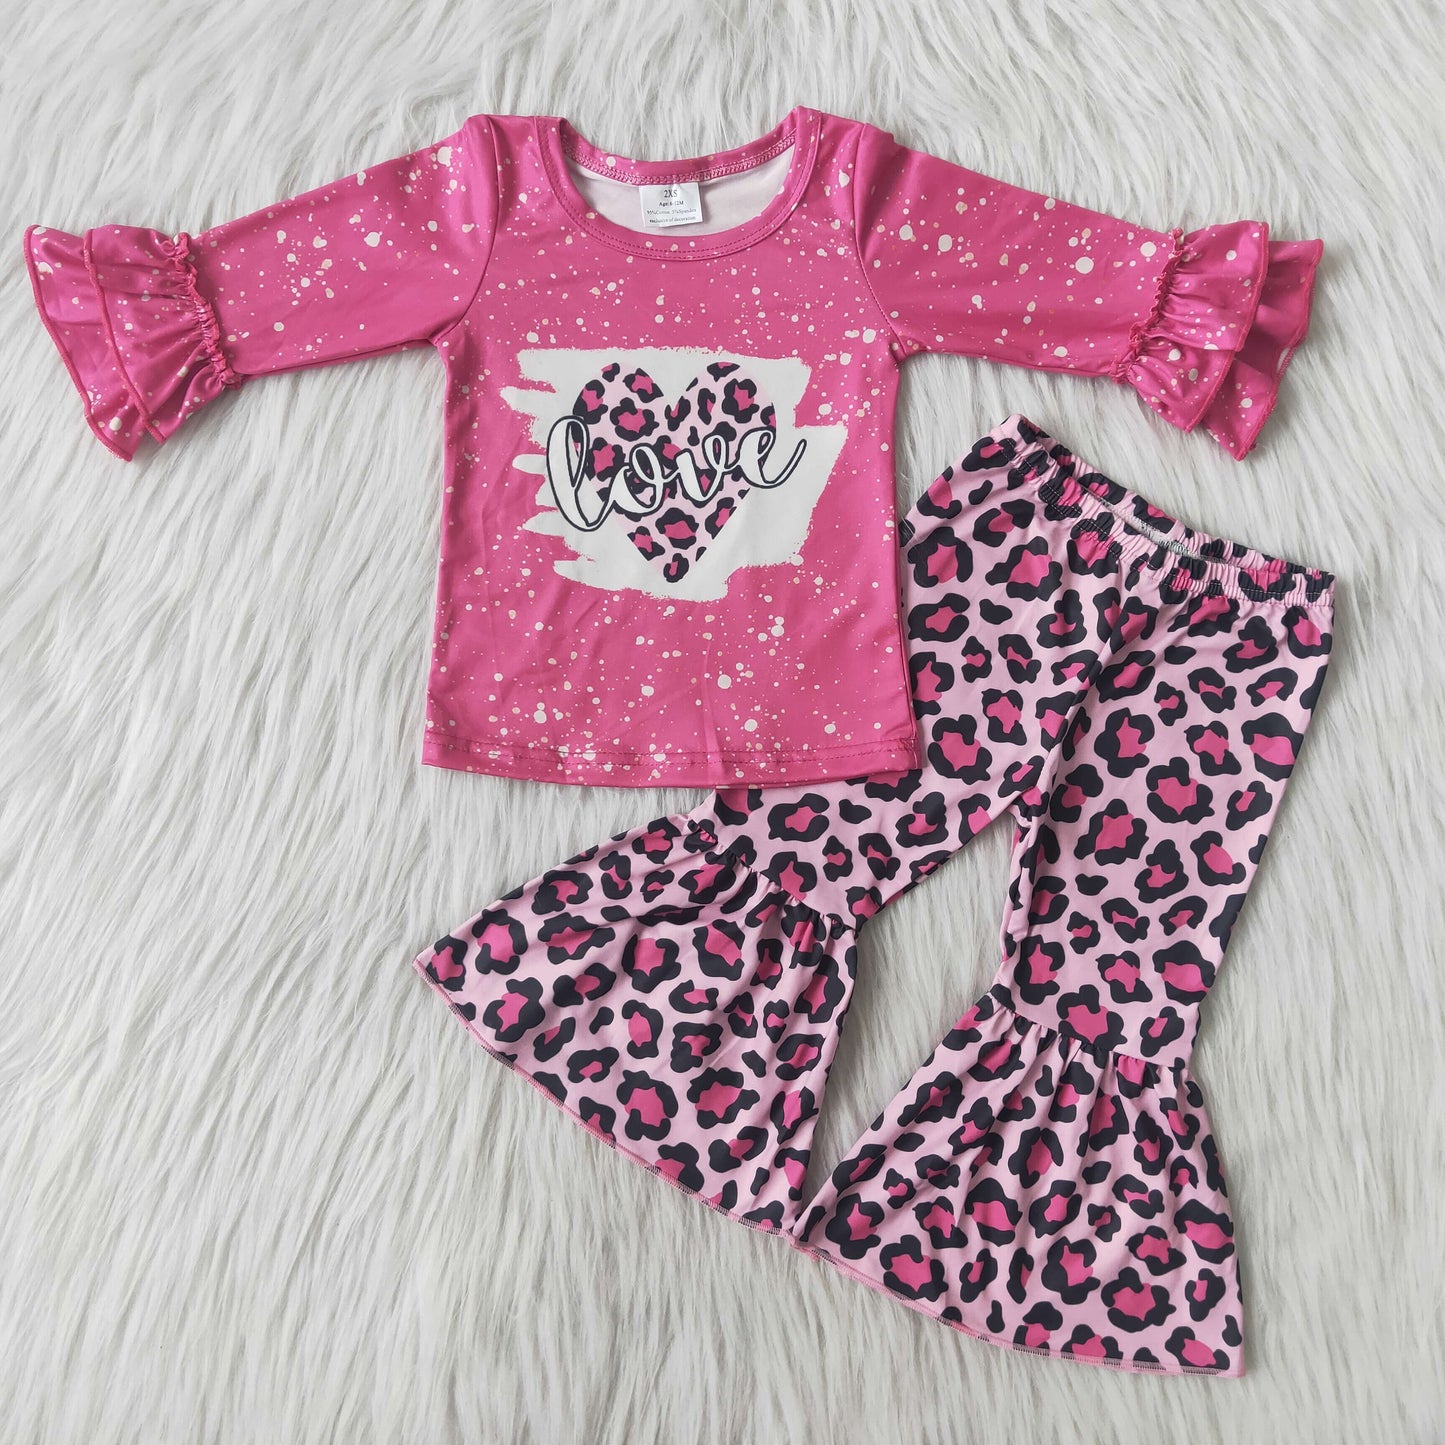 (Promotion)Long sleeve bell bottom pants Valentines outfits